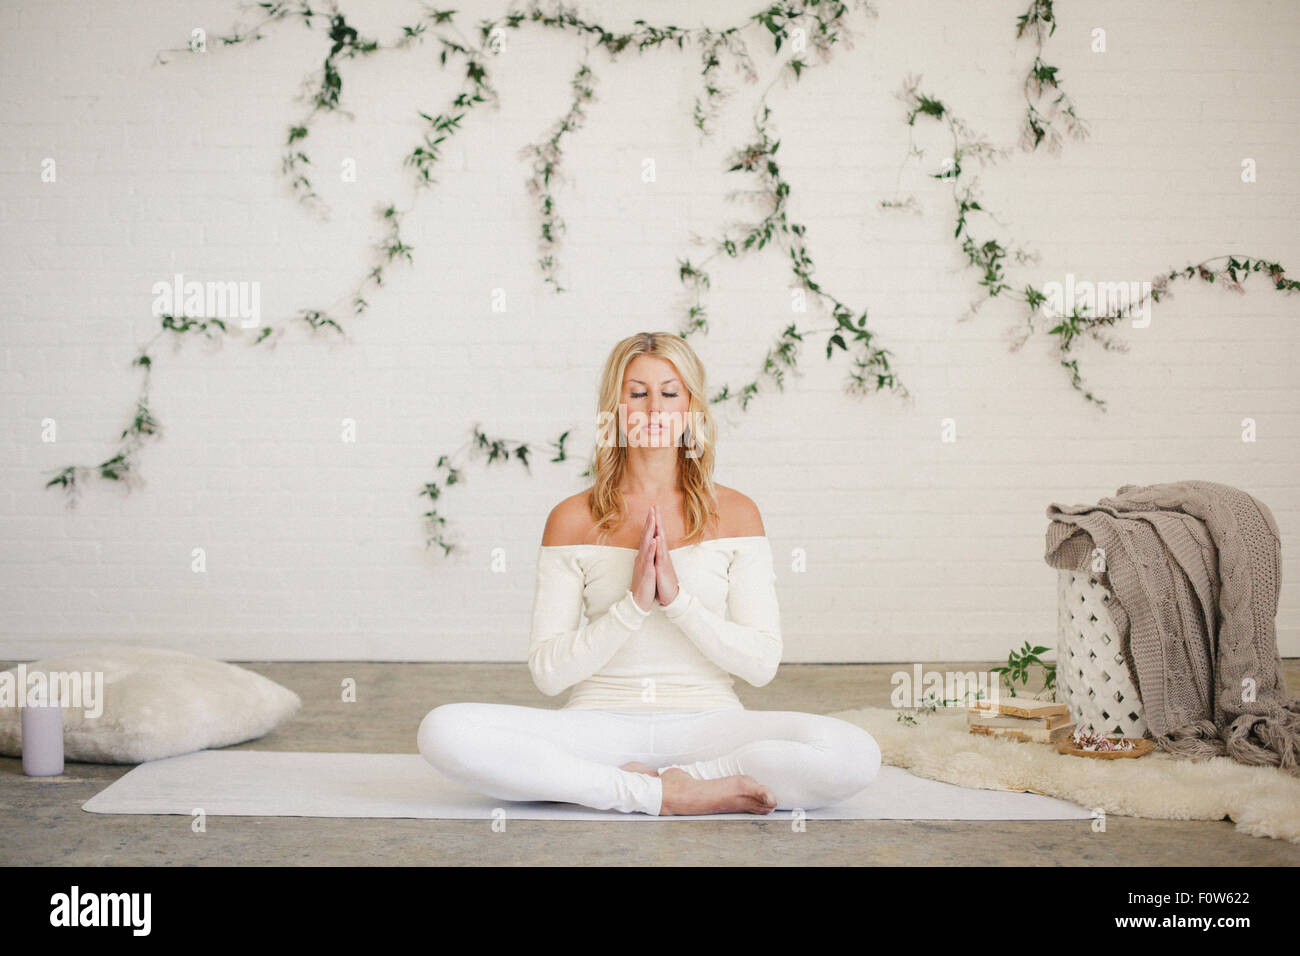 A blonde woman sitting on a white mat in a room, doing yoga. A creeper plant on the wall behind her. Stock Photo